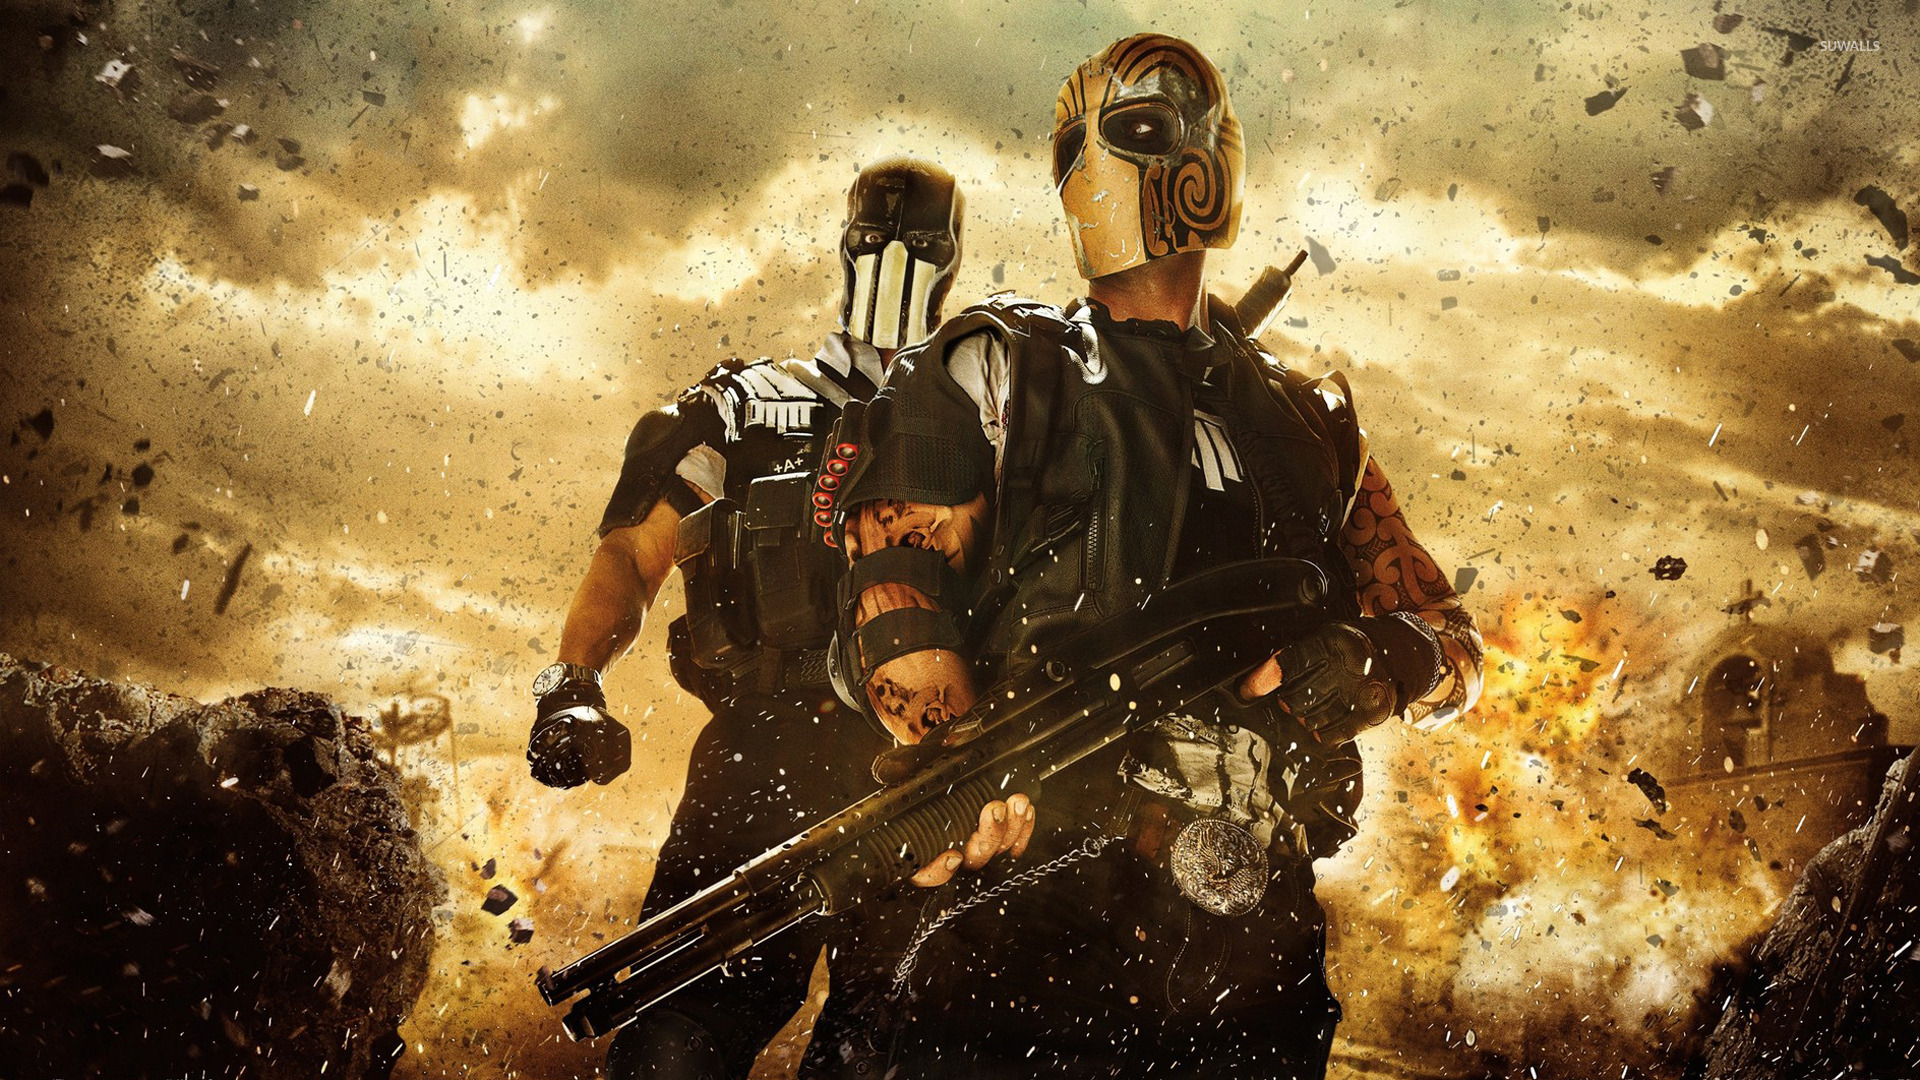 Army Of Two 4k - HD Wallpaper 